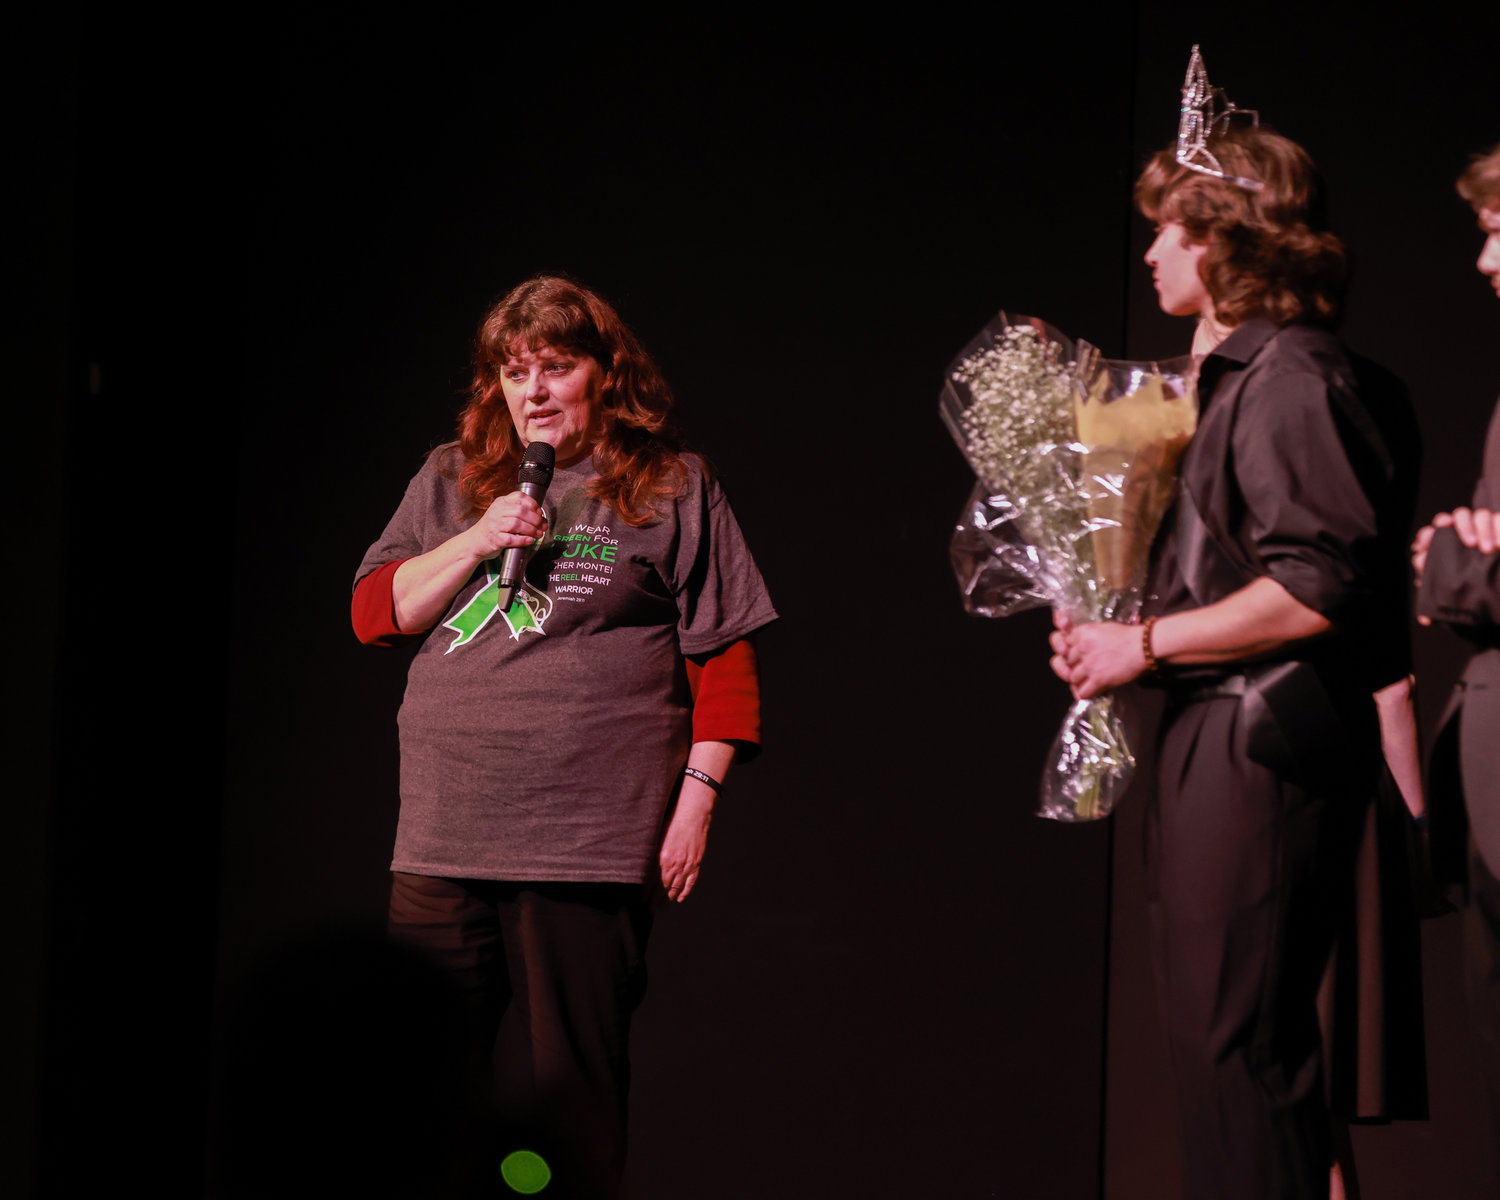 A family member of Luke Montei speaks to the crowd at the end of the Best of BG charity pageant at Battle Ground High School on Saturday, March 25.